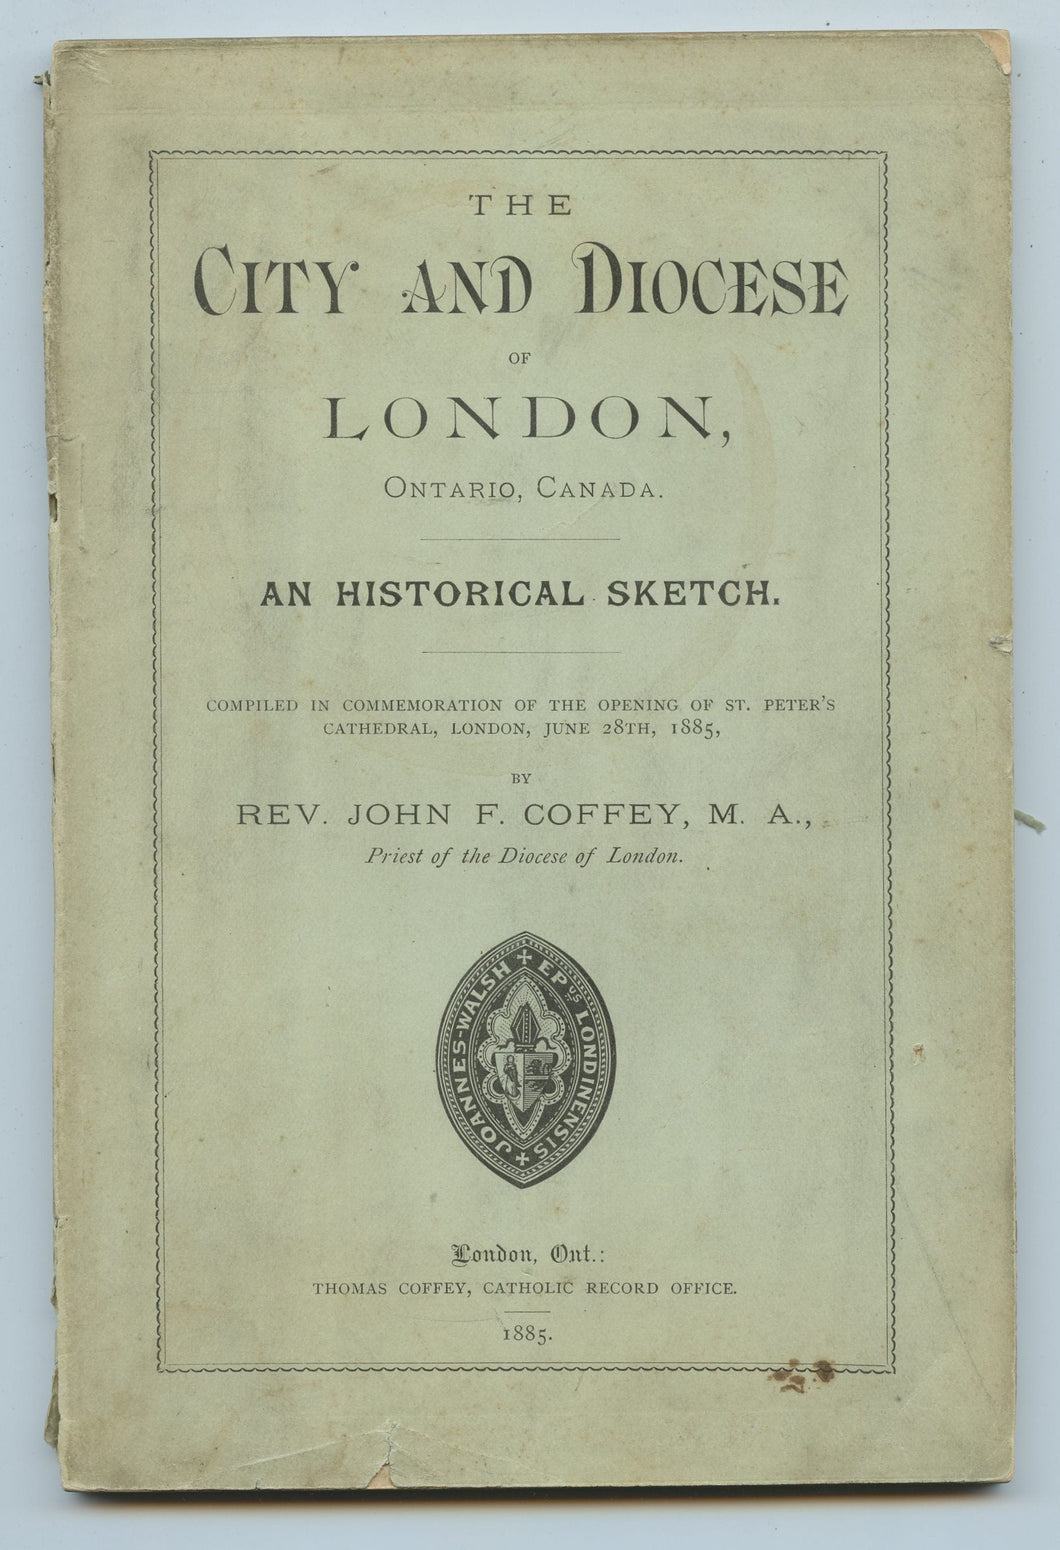 The City and Diocese of London, Ontario, Canada. an Historical Sketch. Compiled in commemoration of the opening of St. Peter's Cathedral, London, June 28th, 1885